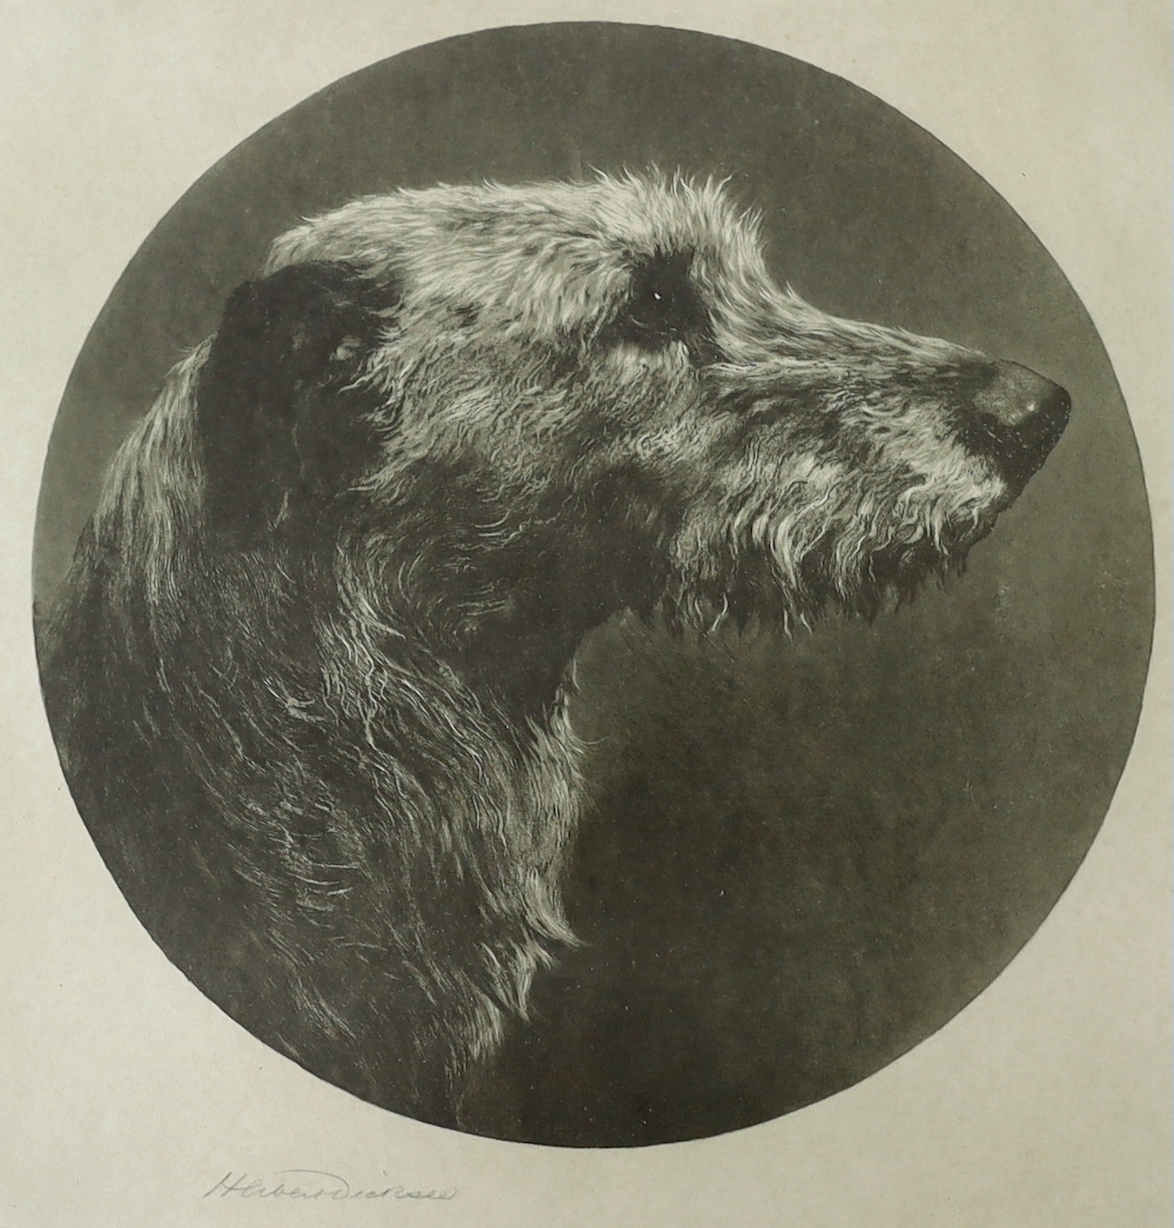 Herbert Dicksee (1862-1942), etching, The Old Hound, signed in pencil, publ. 1912, 38 x 38cm